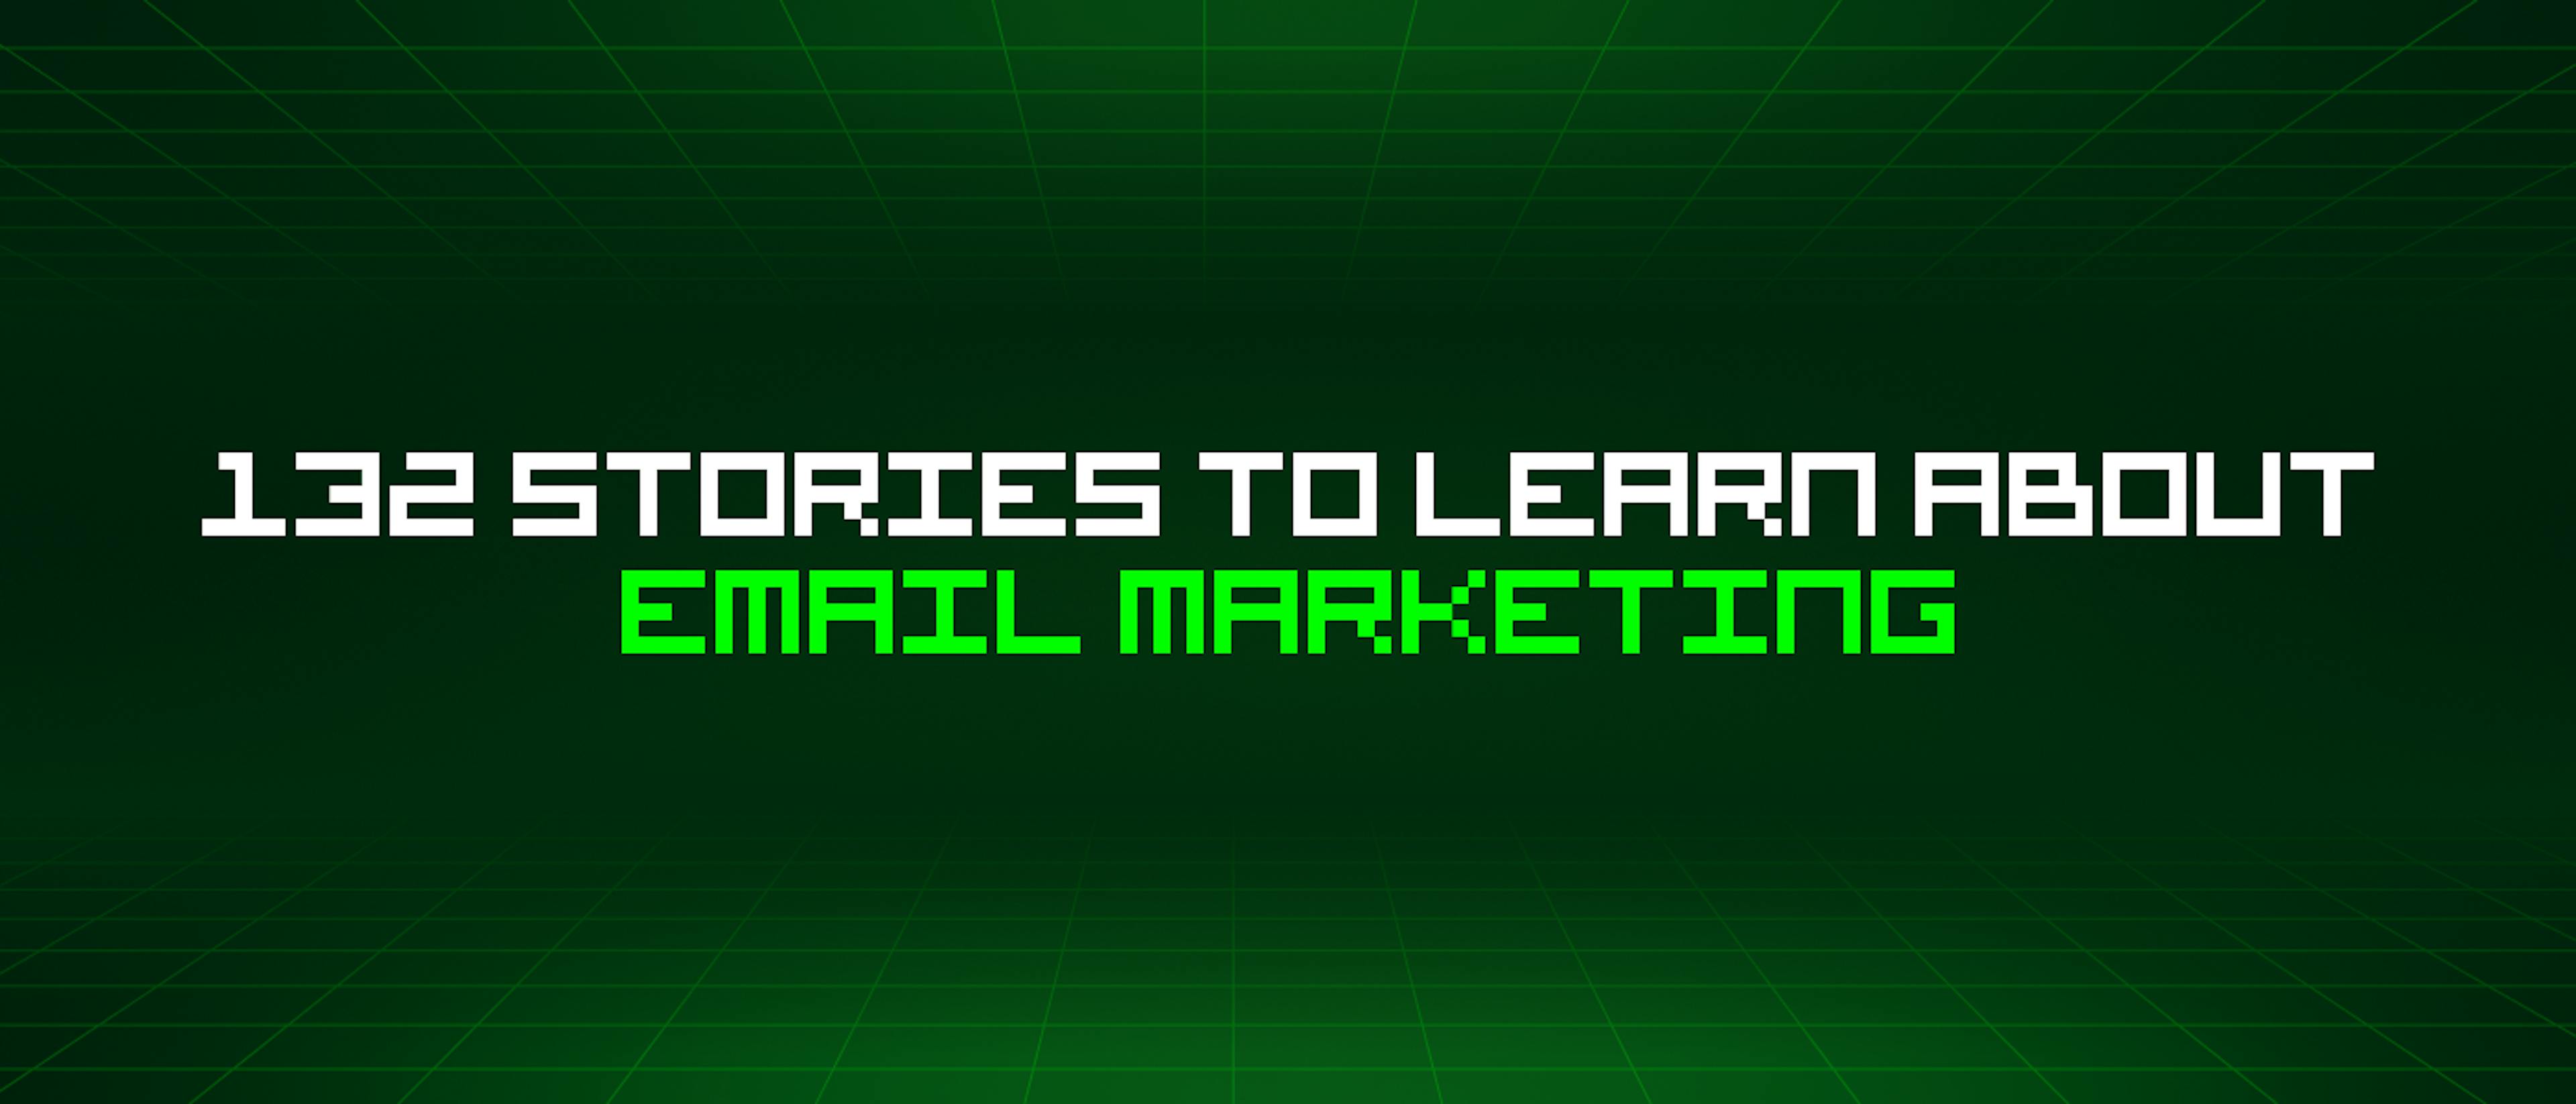 featured image - 132 Stories To Learn About Email Marketing